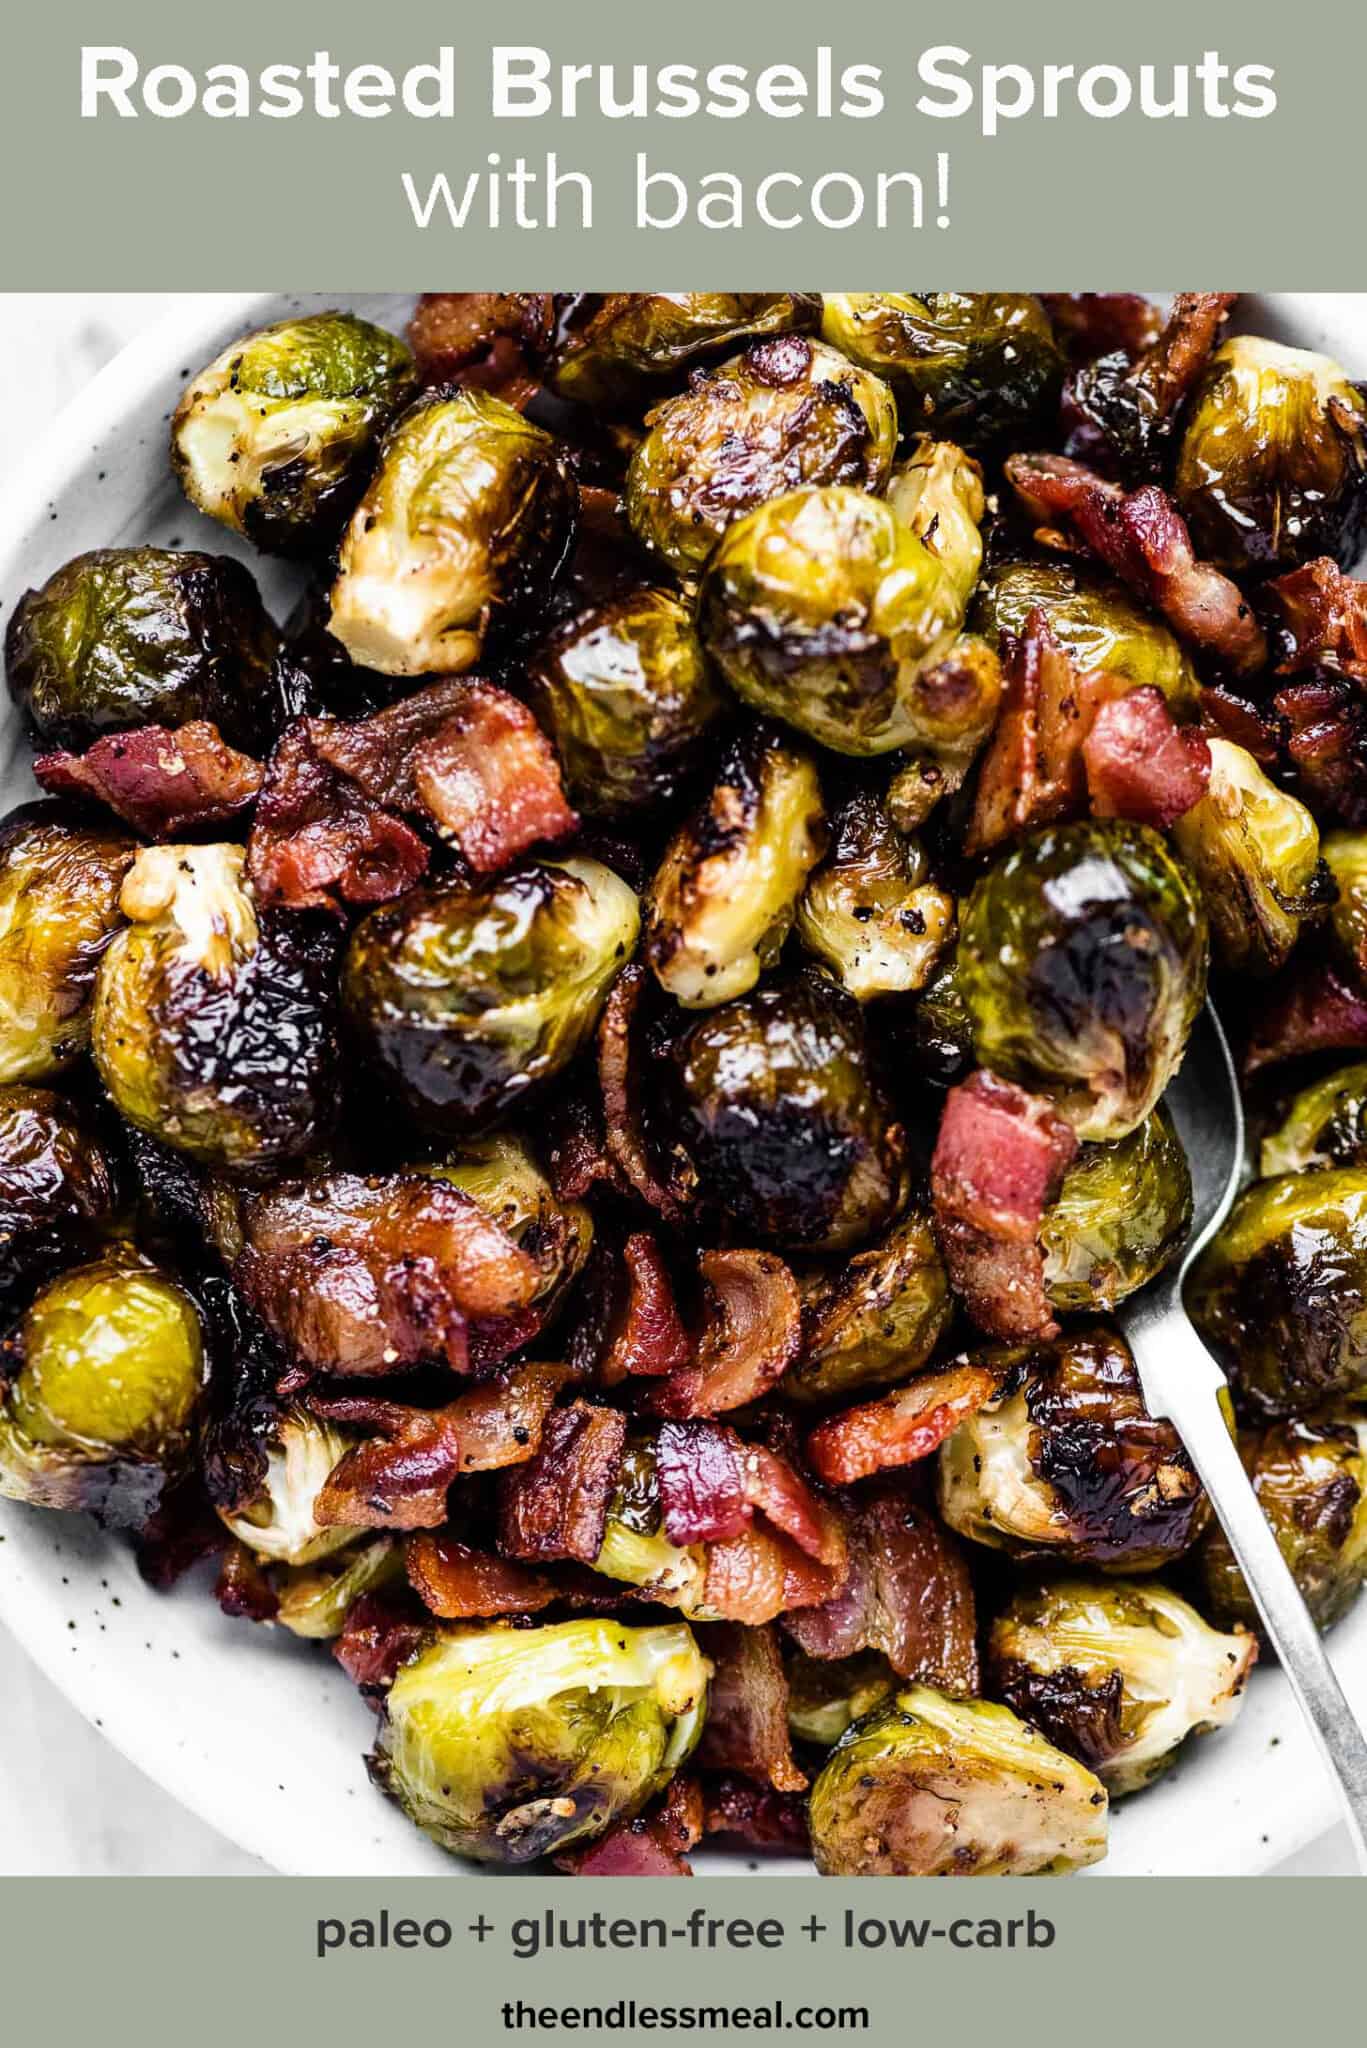 A serving bowl filled with roasted brussels sprouts with bacon and the recipe title on top of the picture.